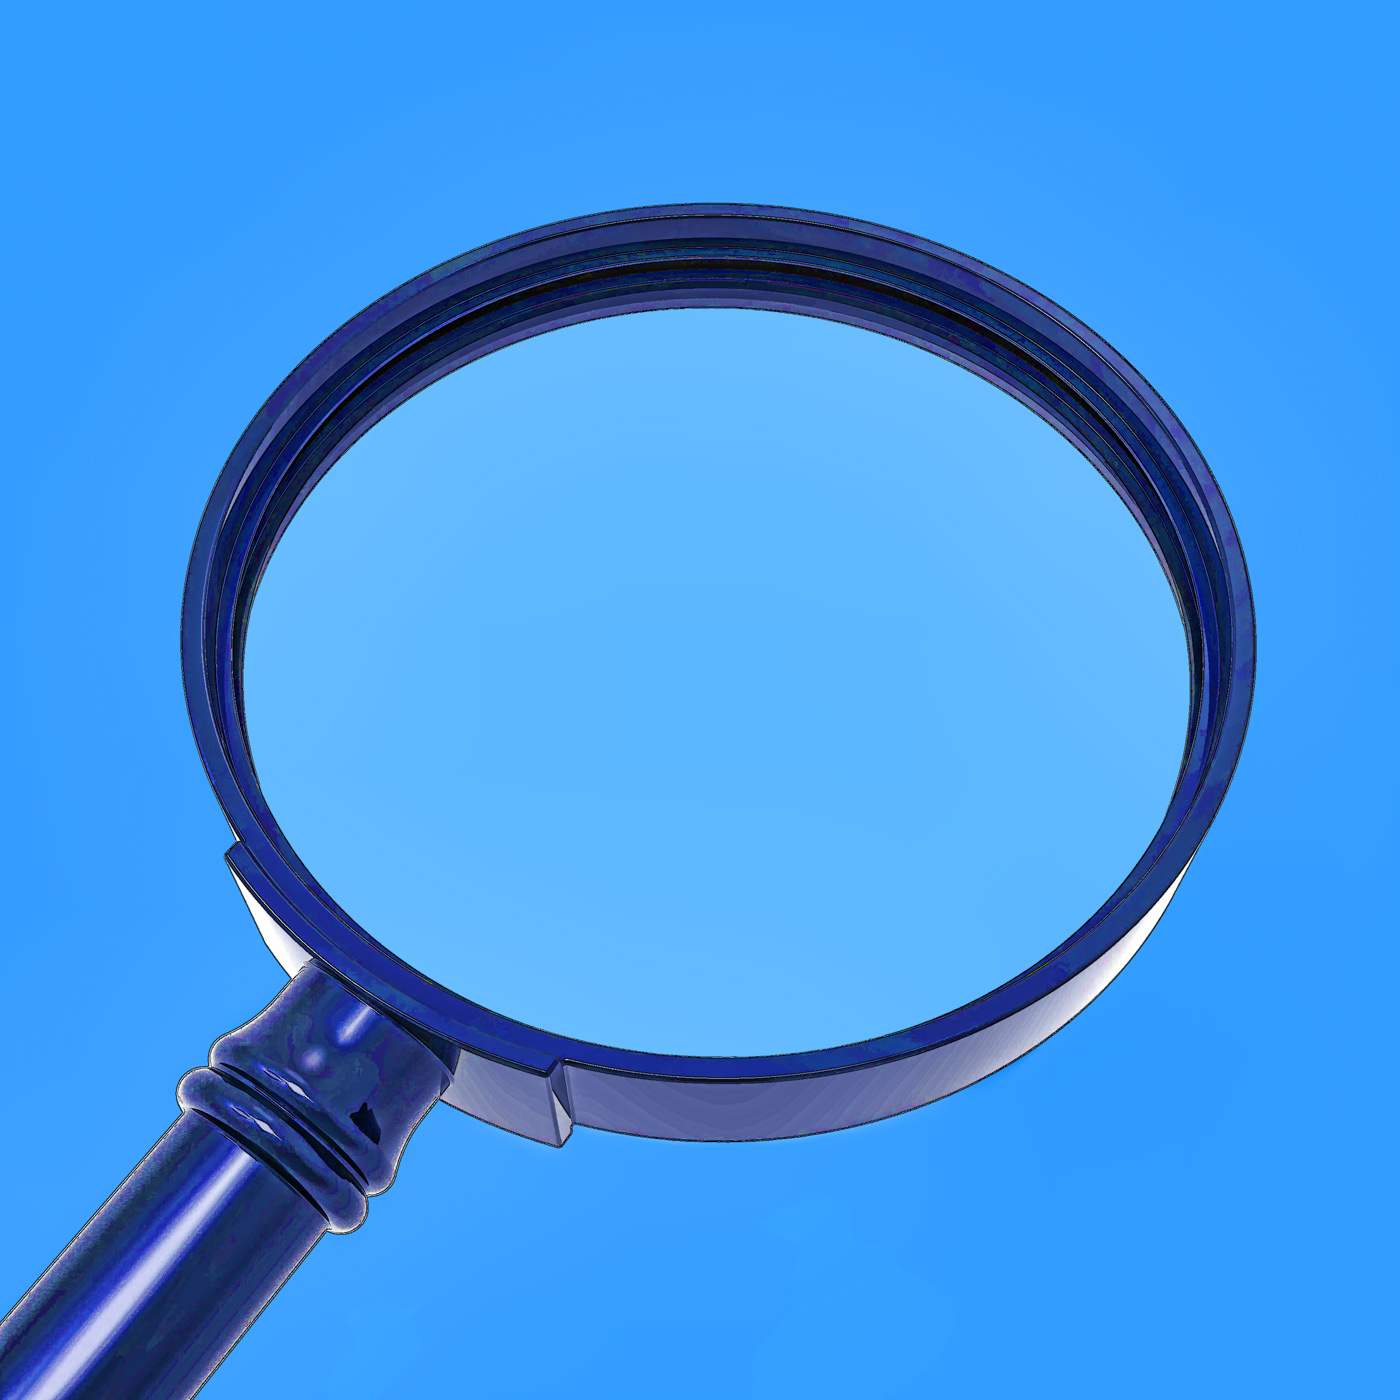 Magnifying glass shows zoom or searching photo